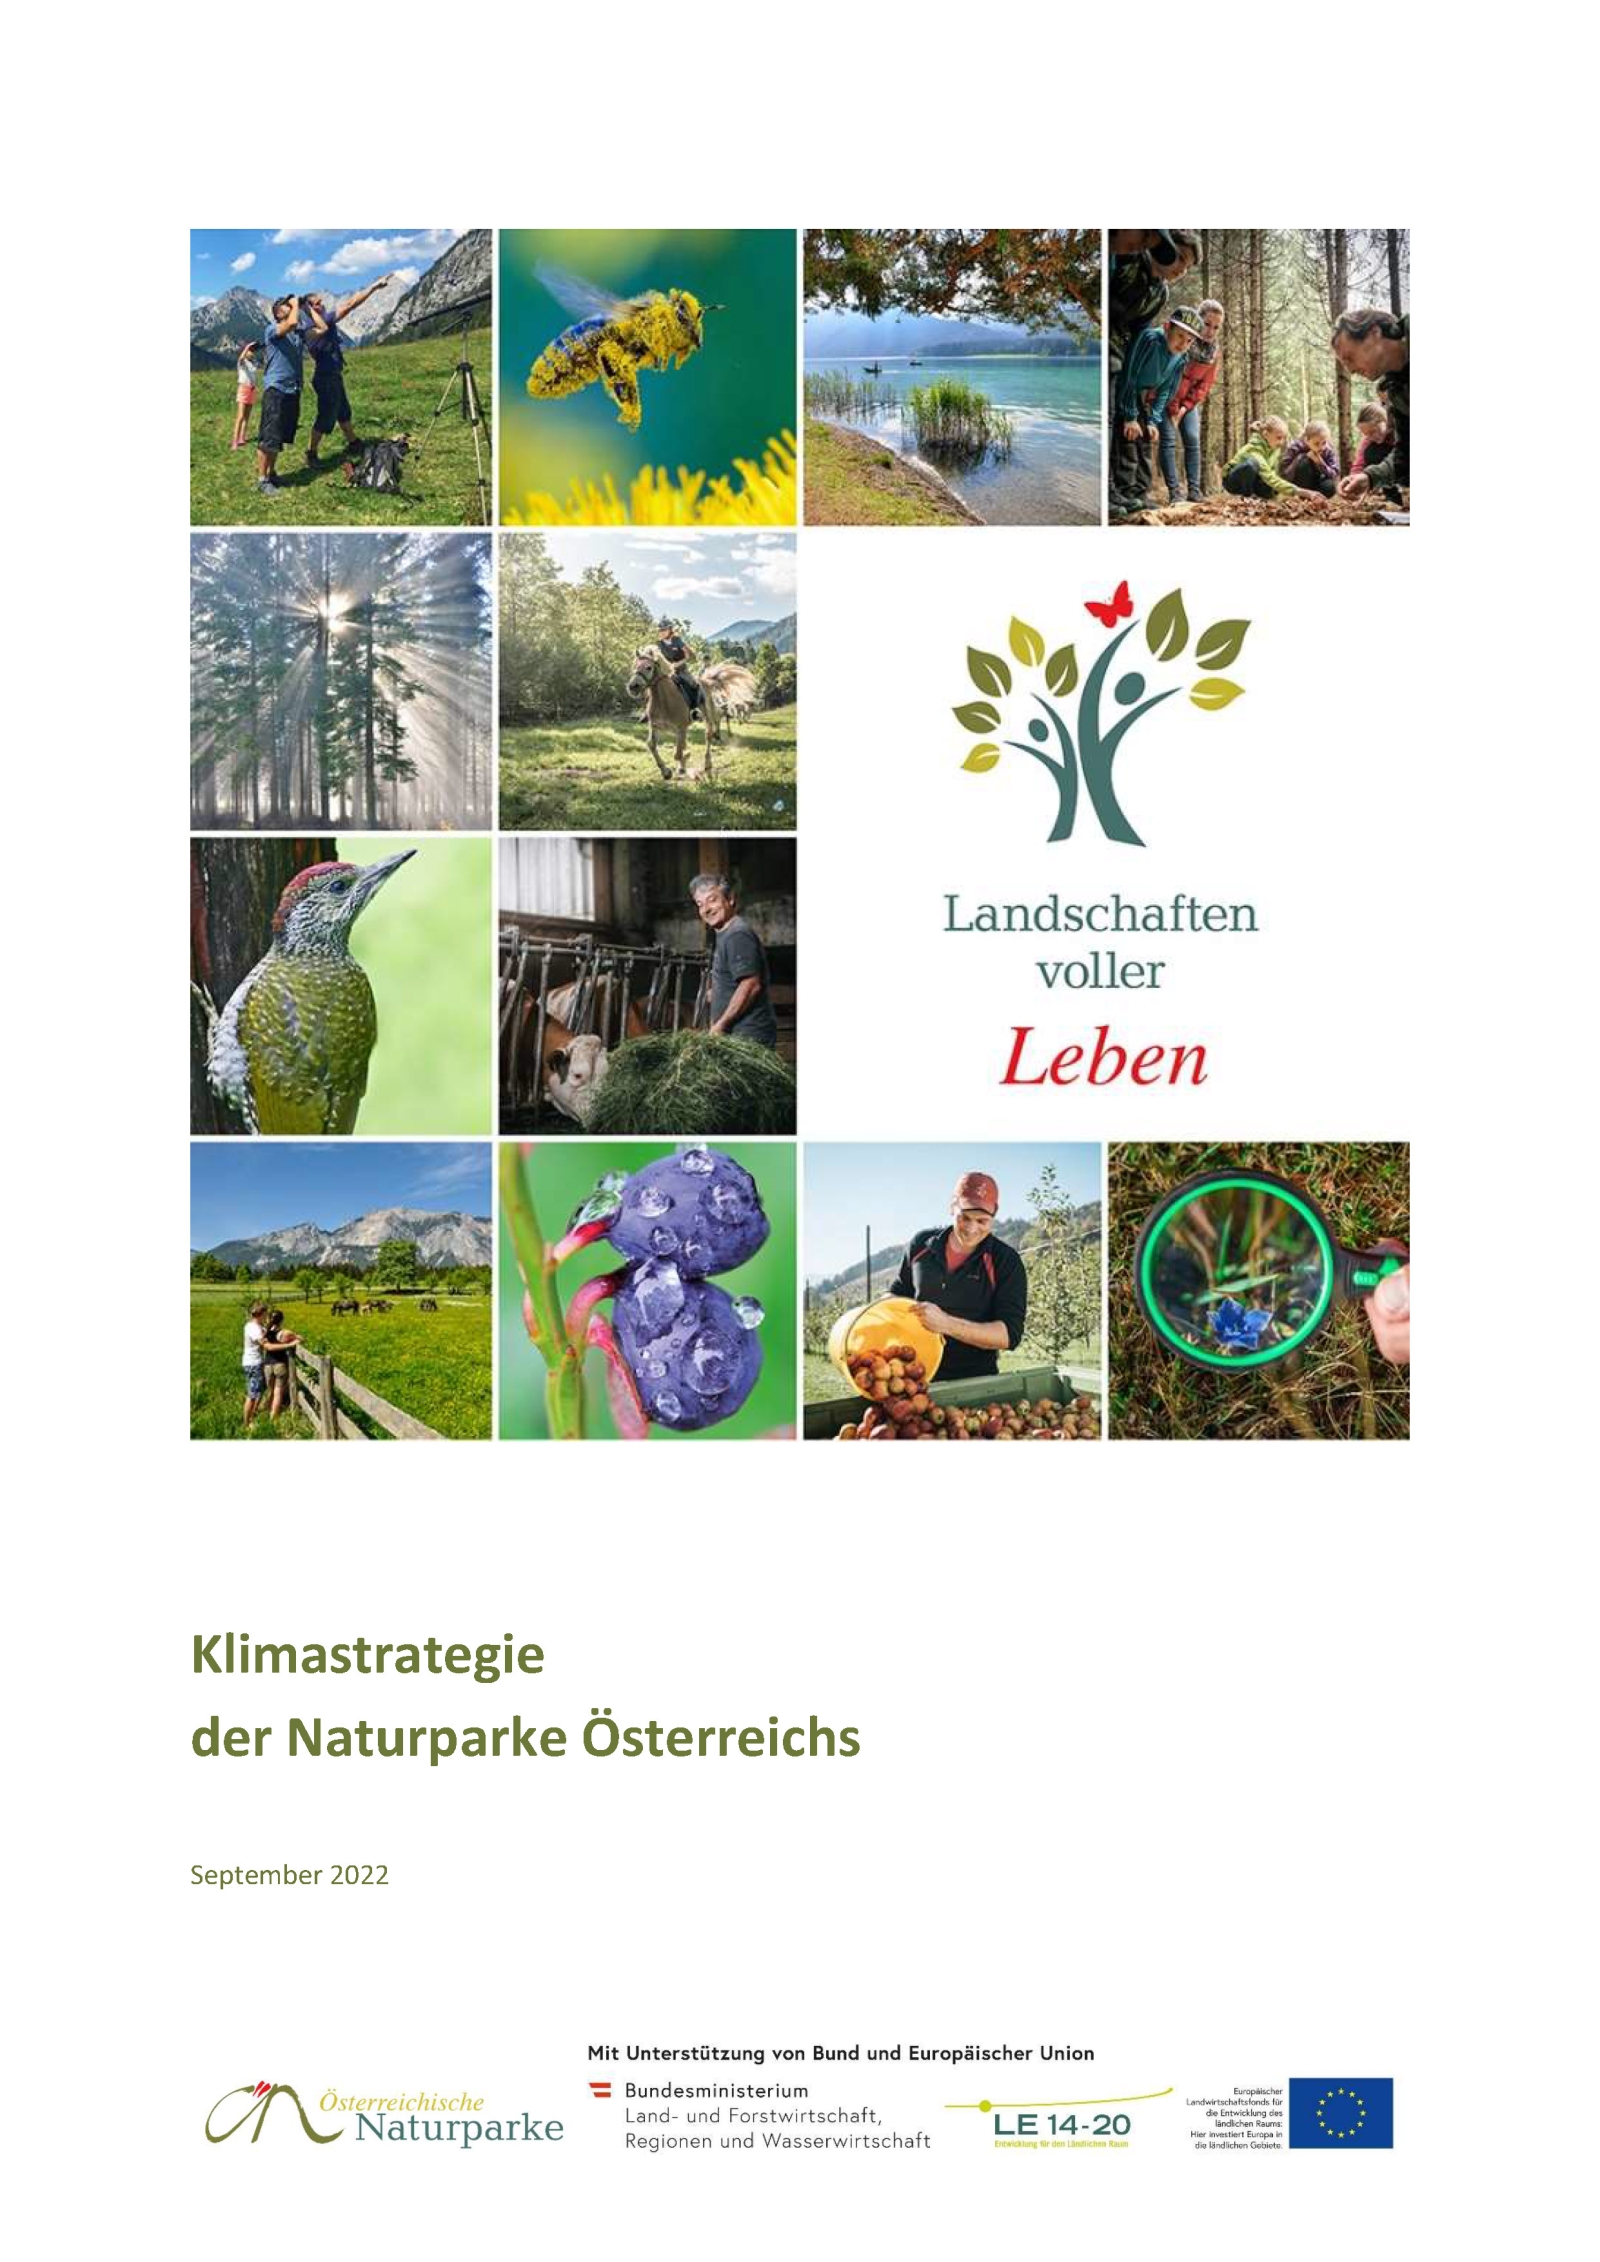 Climate Strategy for the Austrian Nature Parks